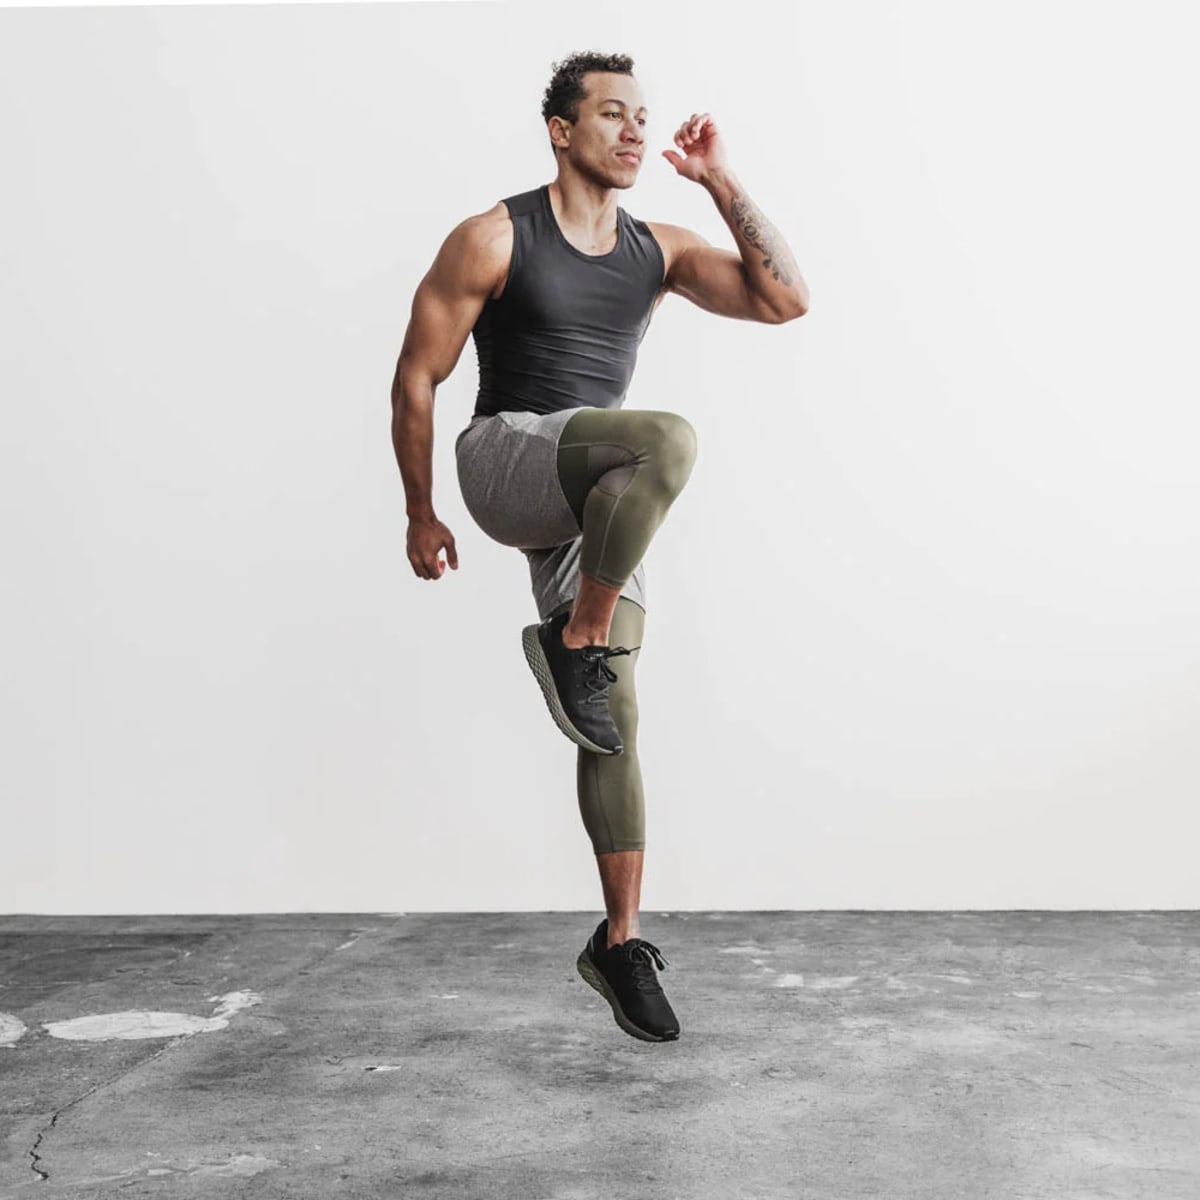 Mens Compression Thermal Running Leggings For Gym, Crossfit, Running,  Jogging Thermal Gymwear Style X0824 From Fashion_official01, $10.34 |  DHgate.Com